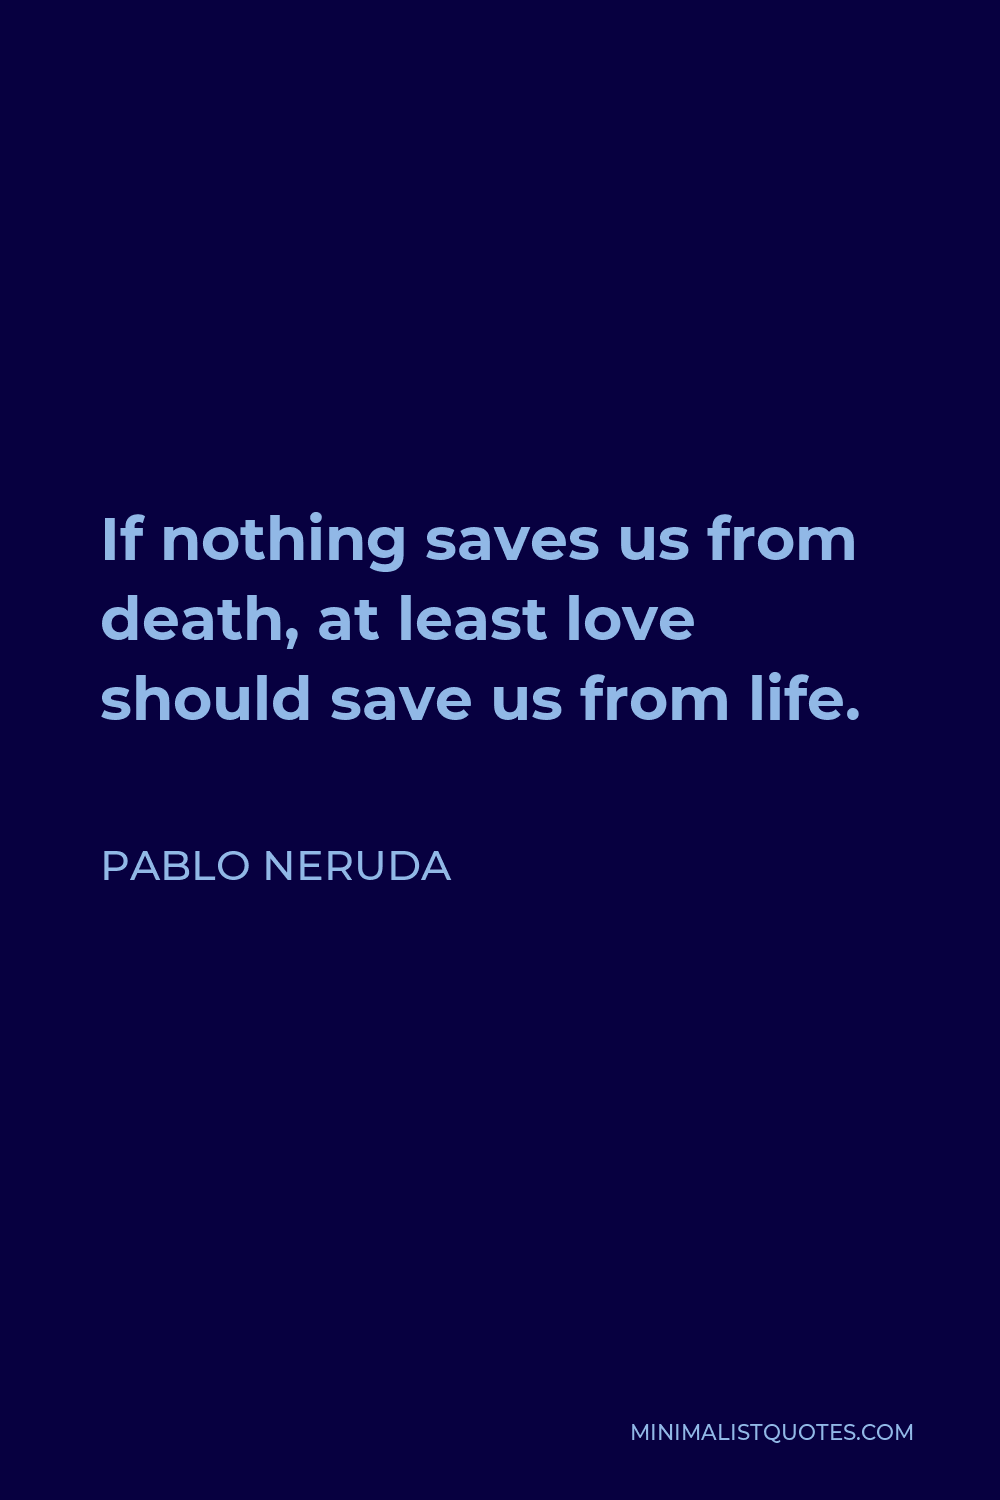 Pablo Neruda Quote - If nothing saves us from death, at least love should save us from life.